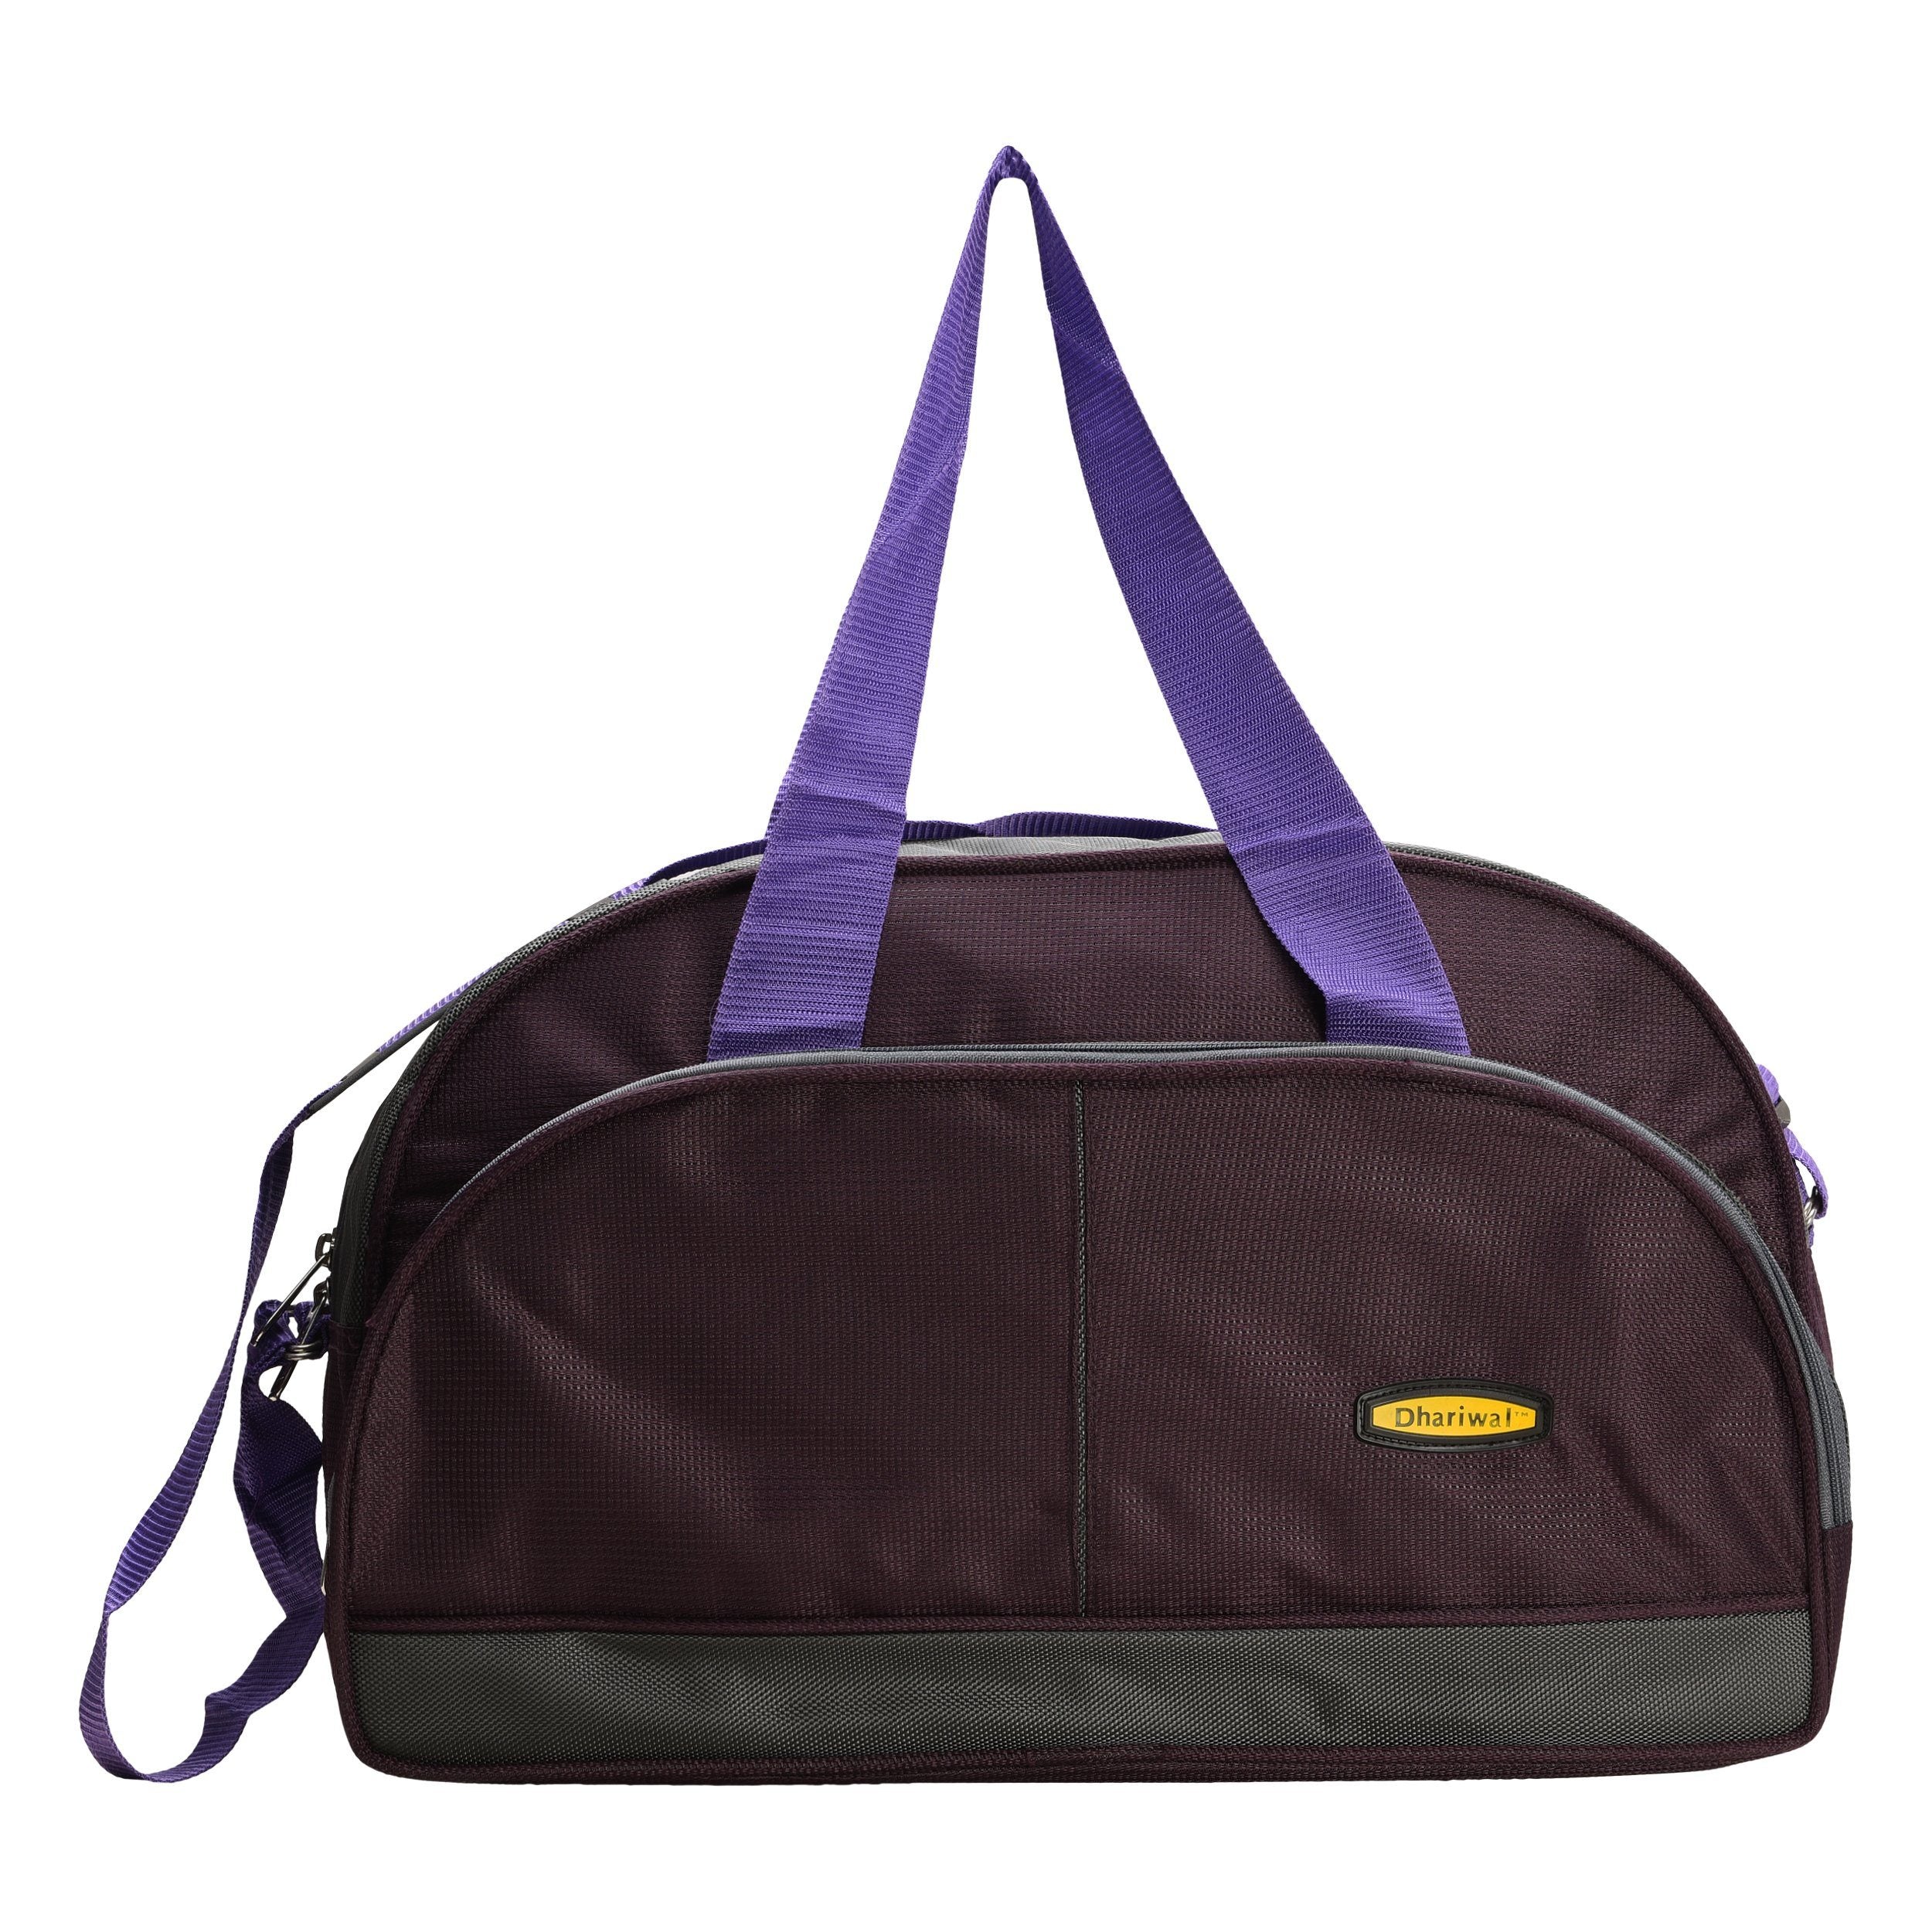 travelling bag d 16 trb 508 small travelling bags dhariwal purple 923690